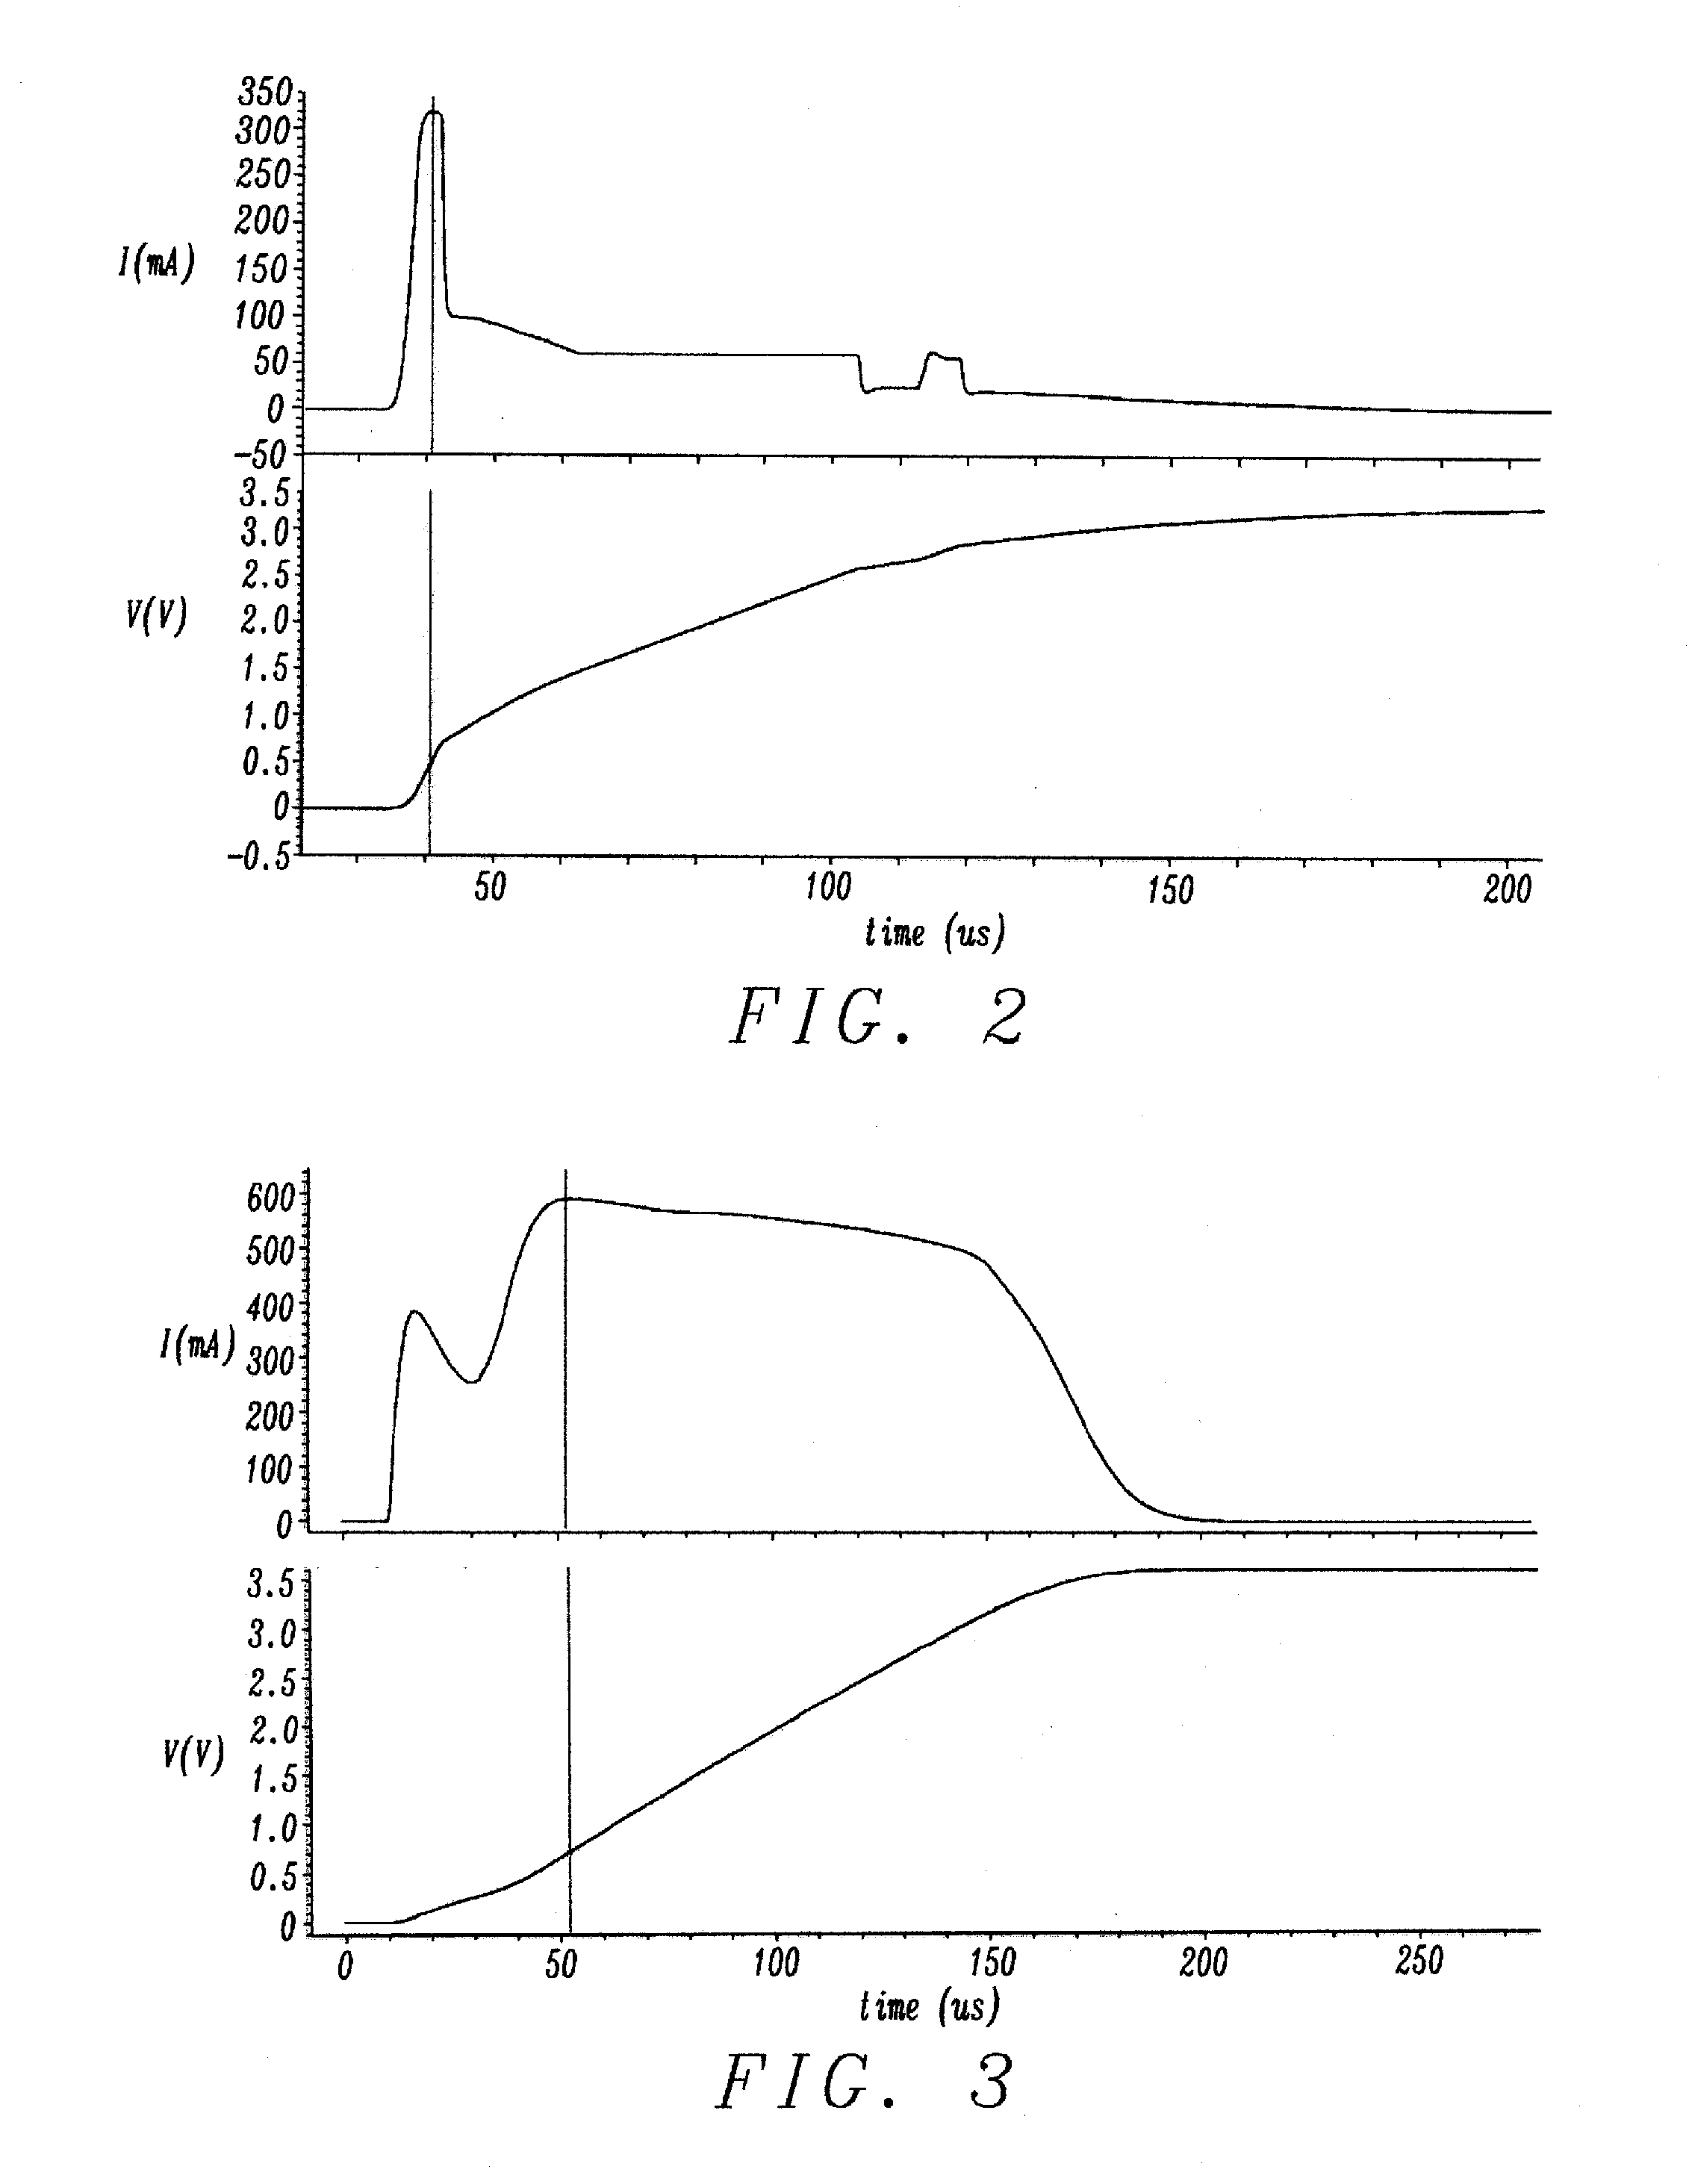 Method and Apparatus for Limiting Startup Inrush Current for Low Dropout Regulator